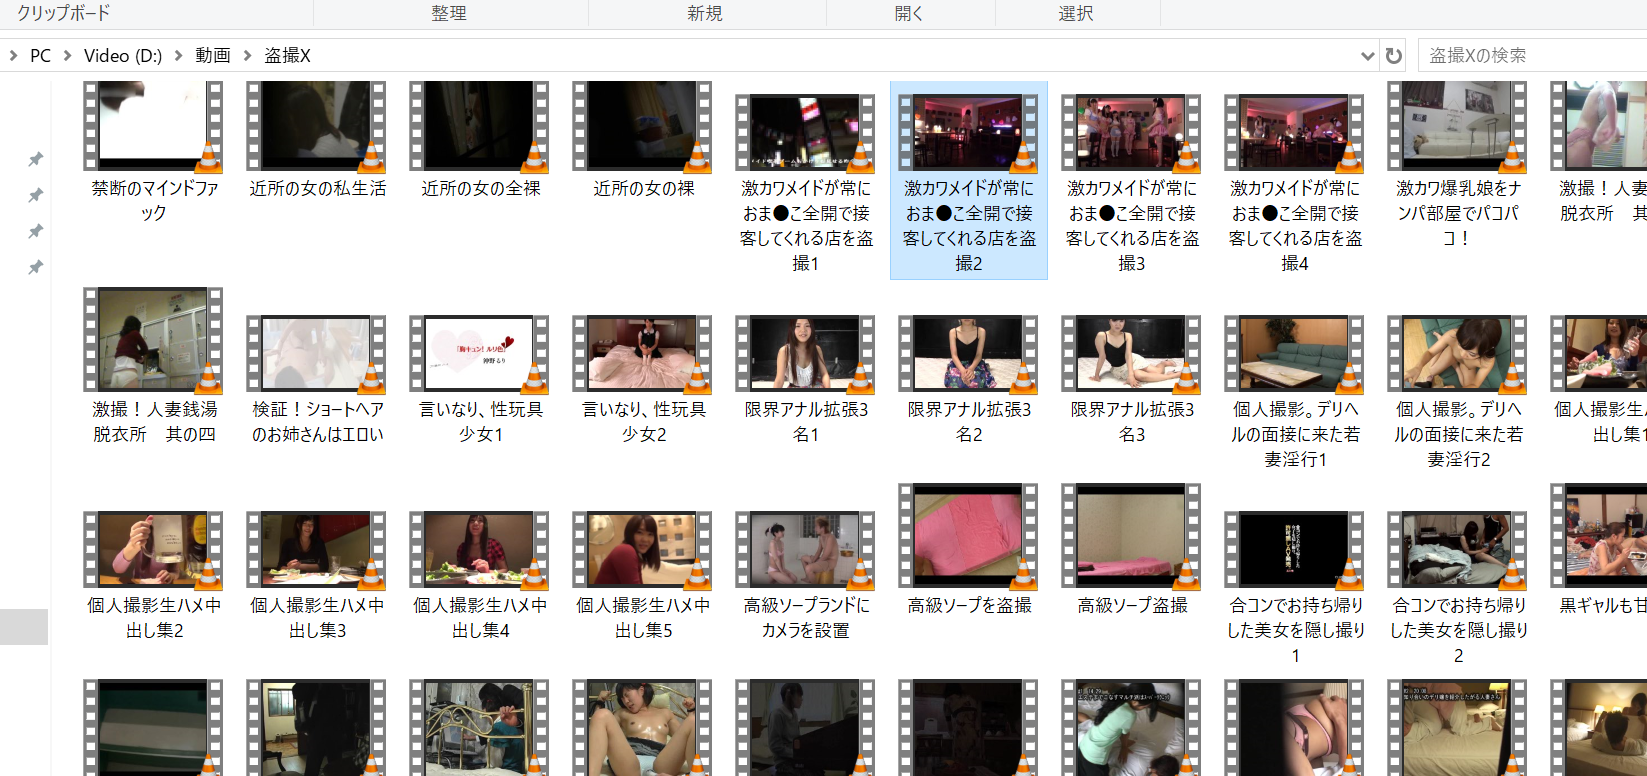 some of the uncensored JAV erotic videos I downloaded when I was a member of Voyeur X